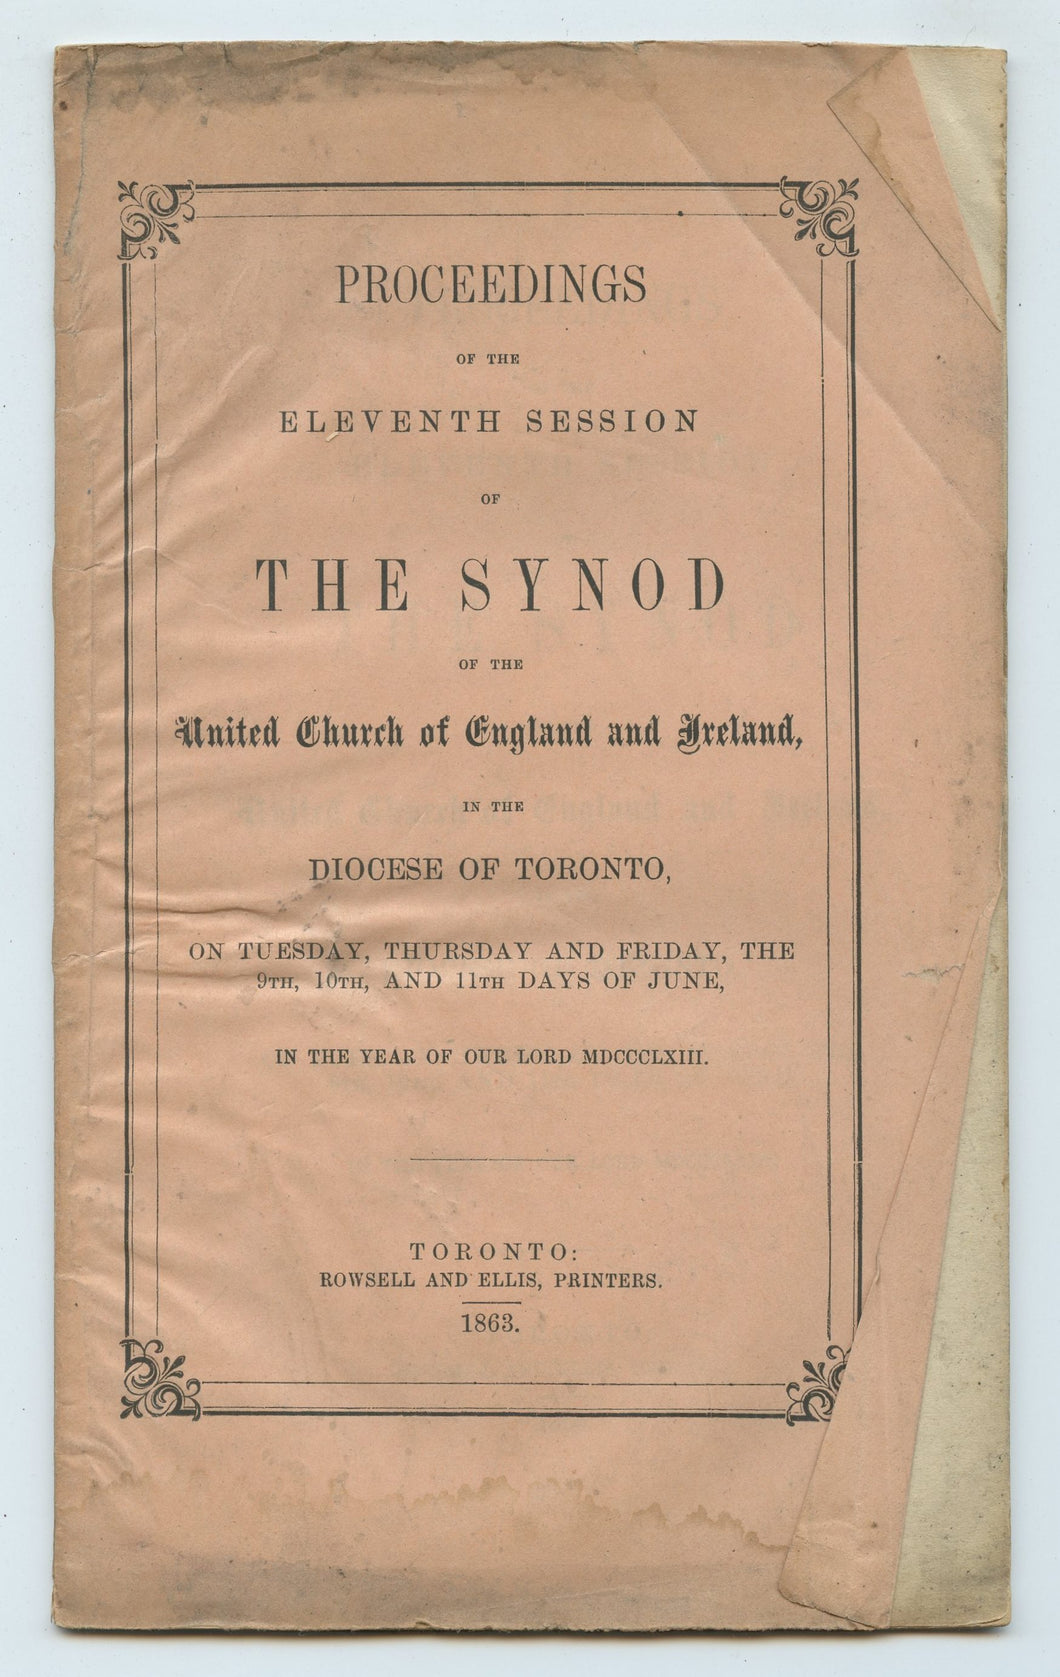 Proceedings of the Eleventh Session of The Synod of the United Church of England & Ireland in the Diocese of Toronto, on Tuesday, Thursday, and Friday, the 9th, 10th, and 11th Days of June, in the Year of Our Lord MDCCCLXII